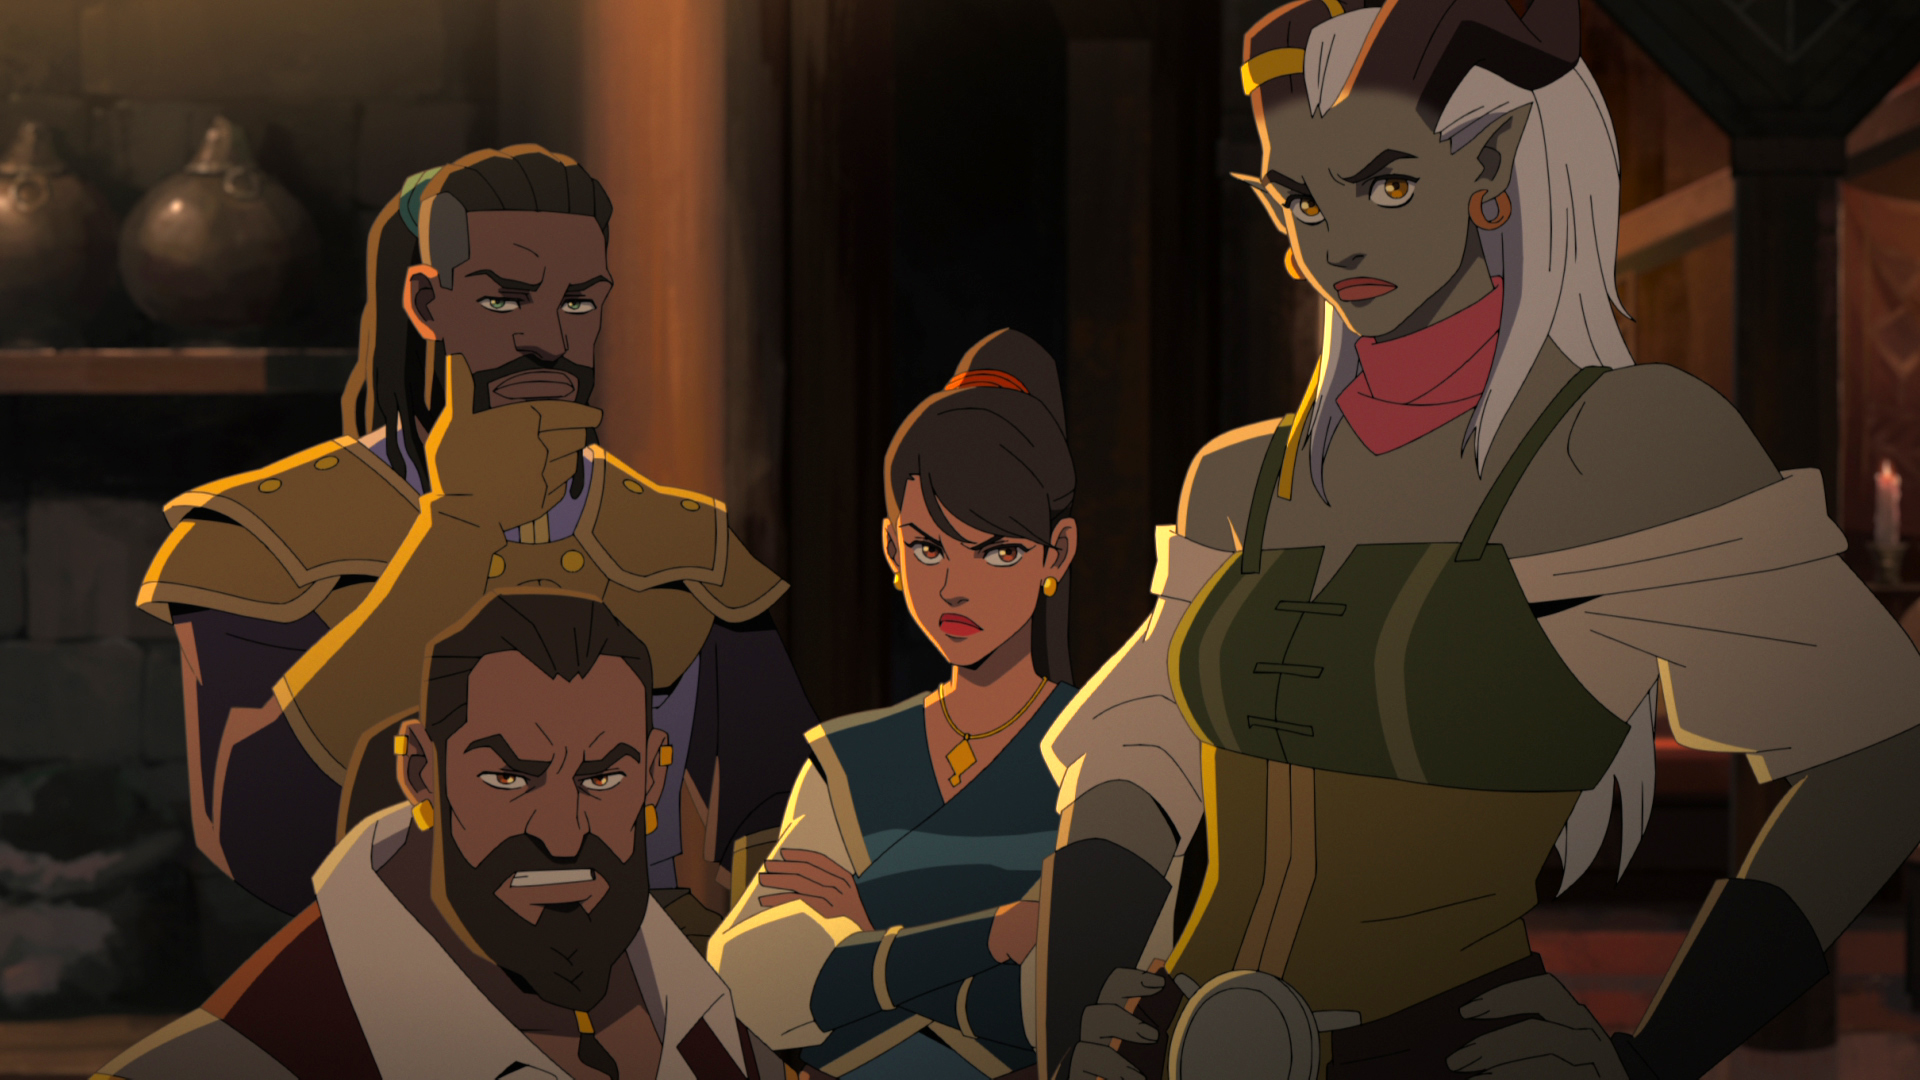 REVIEW: The Legend of Vox Machina Season 2 Episode 2 Brings the Levity Back